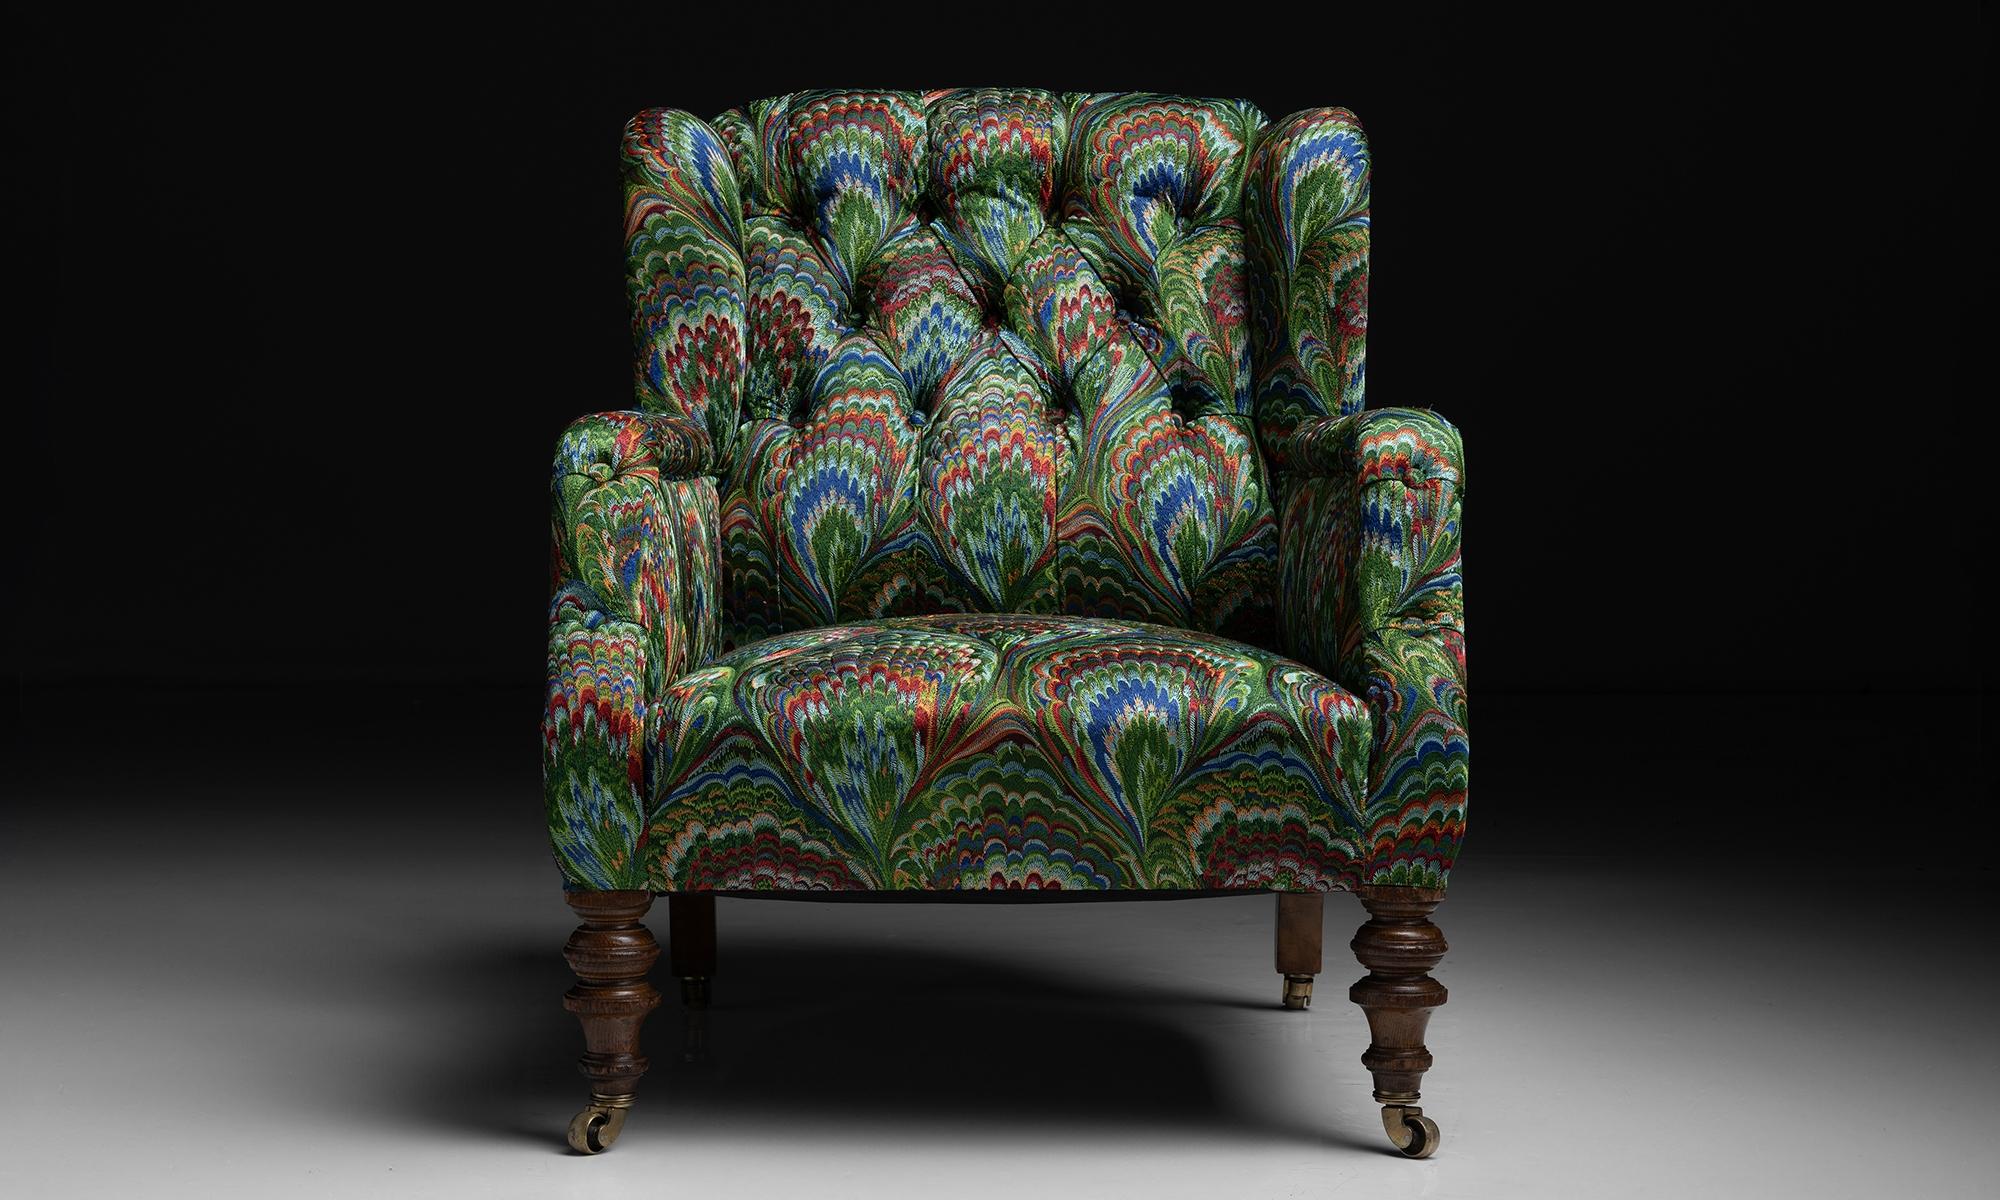 Victorian Armchair in Embroidered Pierre Frey
England circa 1880
Victorian country house armchair newly upholstered in embroidered Pierre Frey fabric.
30”w x 32”d x 37”h x 14”seat